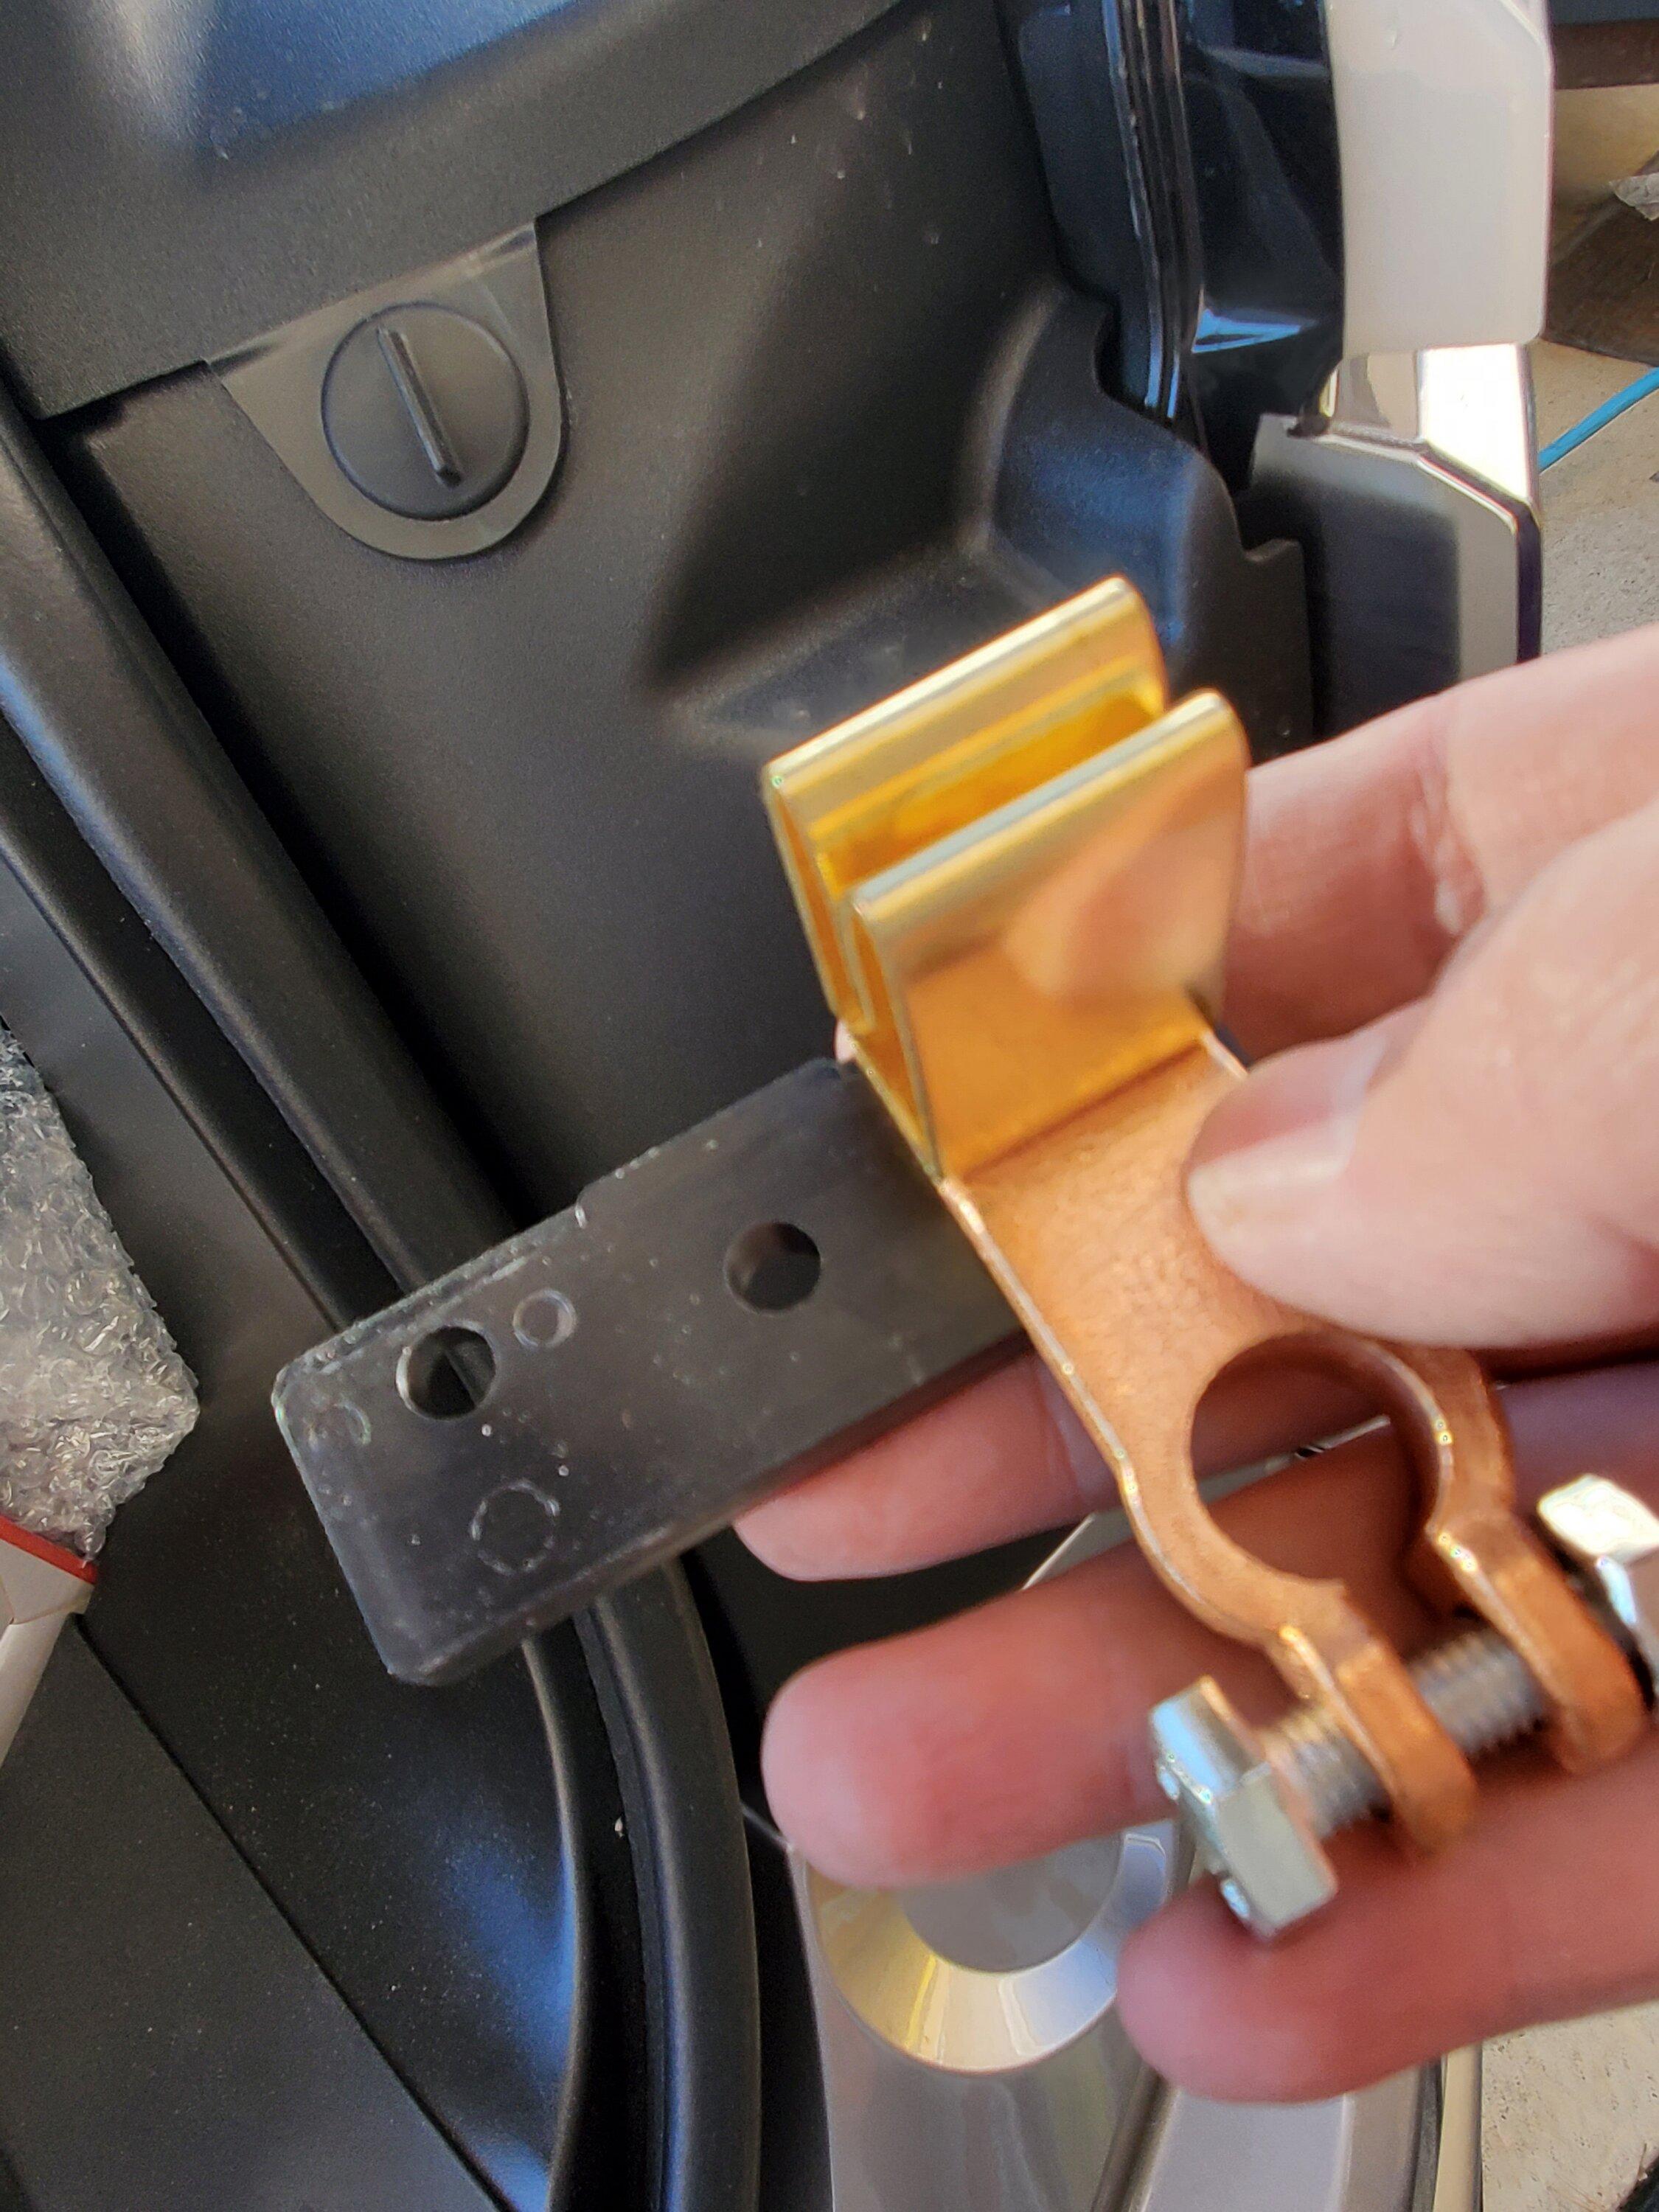 Ford F-150 Lightning 12v Battery disconnect switch installation DIY, with pics 2023-01-21 14.44.08